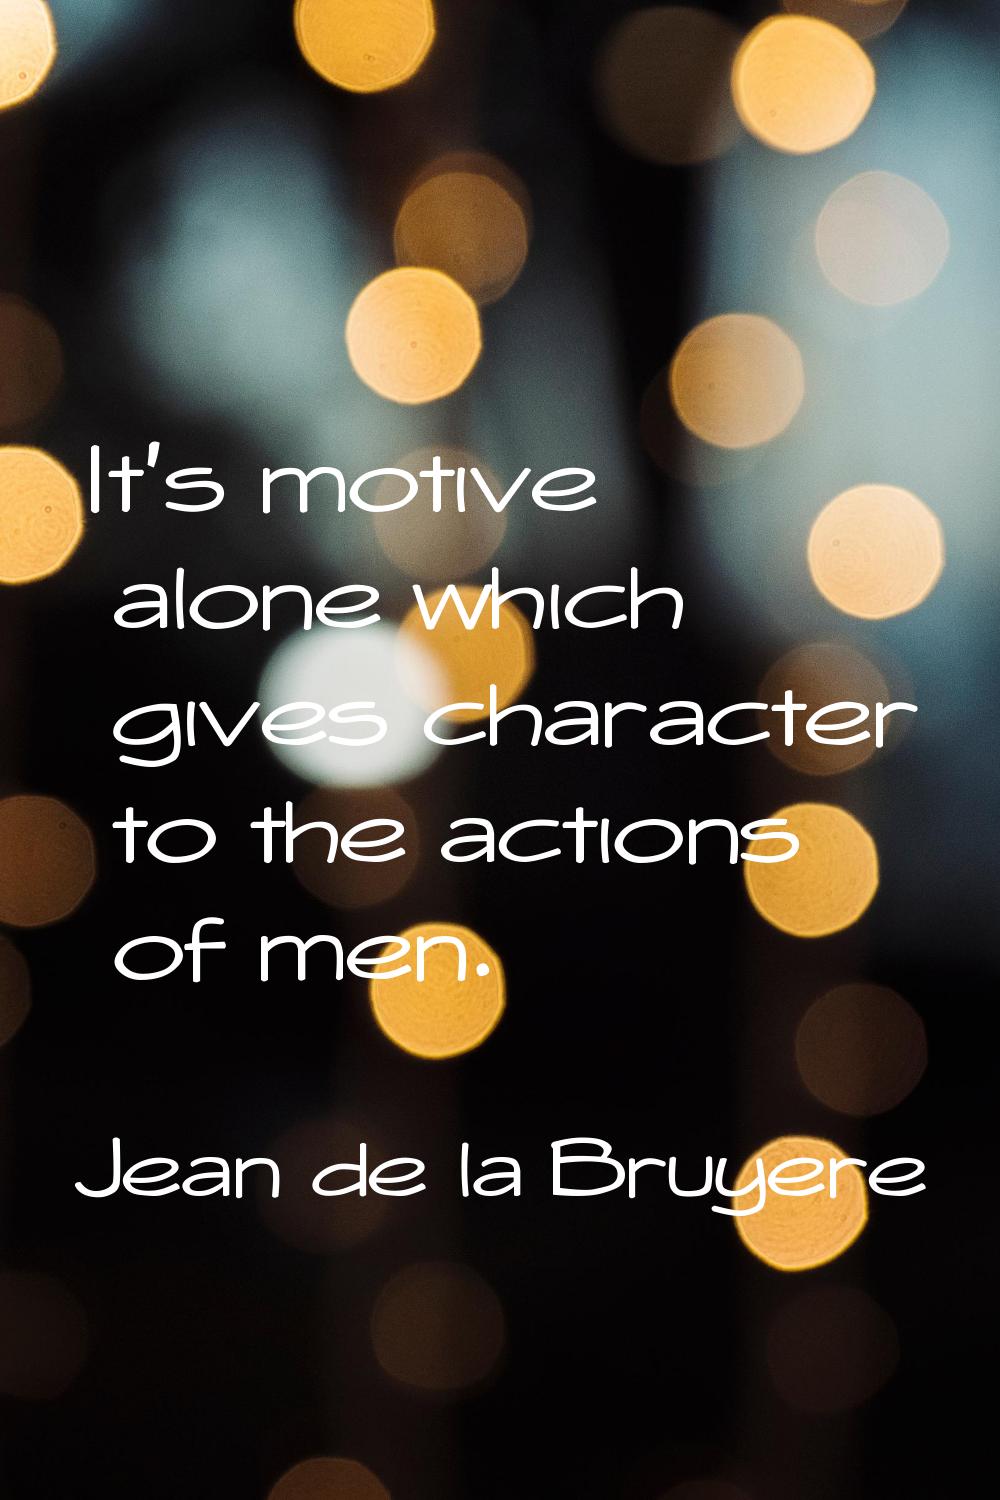 It's motive alone which gives character to the actions of men.